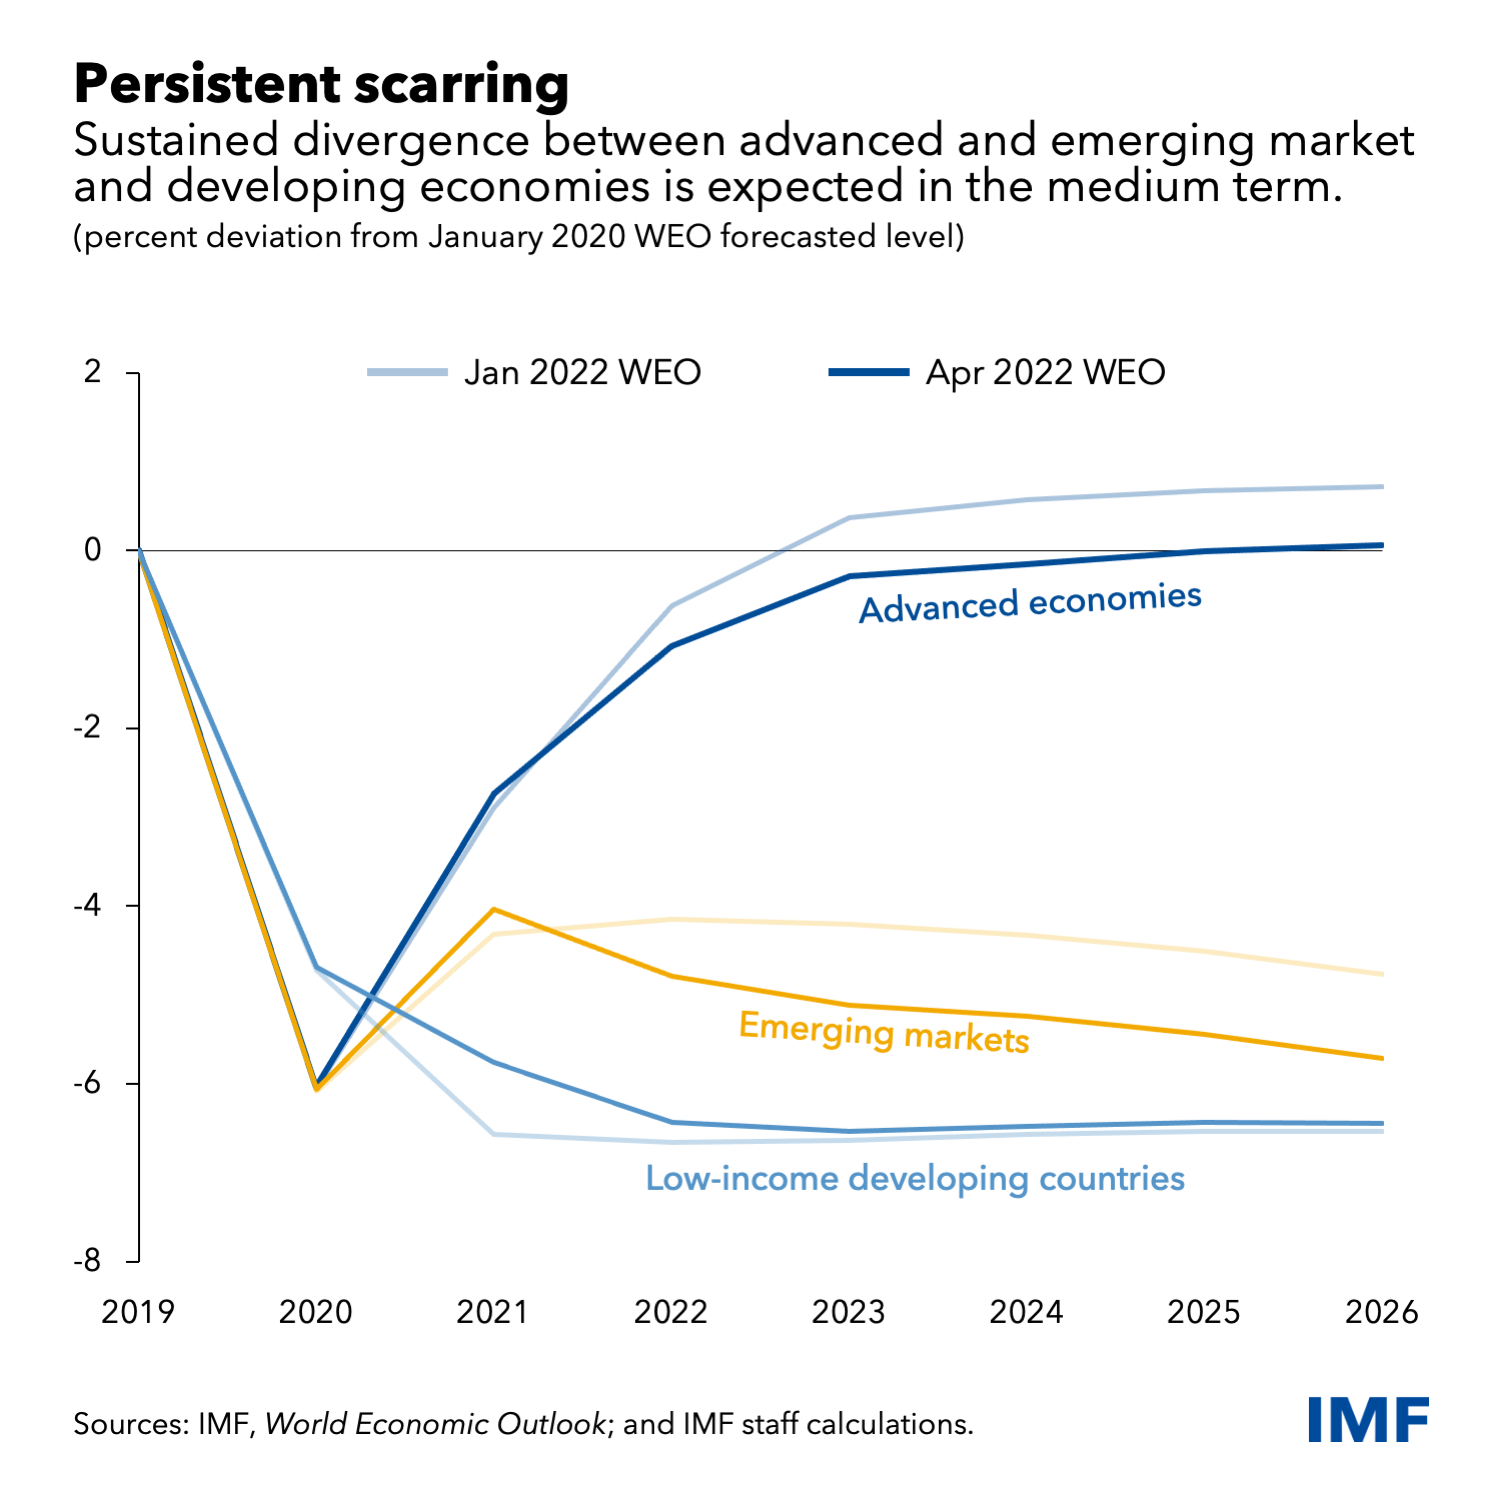 Divergence in projected economic recovery between advanced economies and developing countries, 2019-2026. The graph shows the percent deviation from the levels in the January 2020 IMF forecast. Graphic: IMF